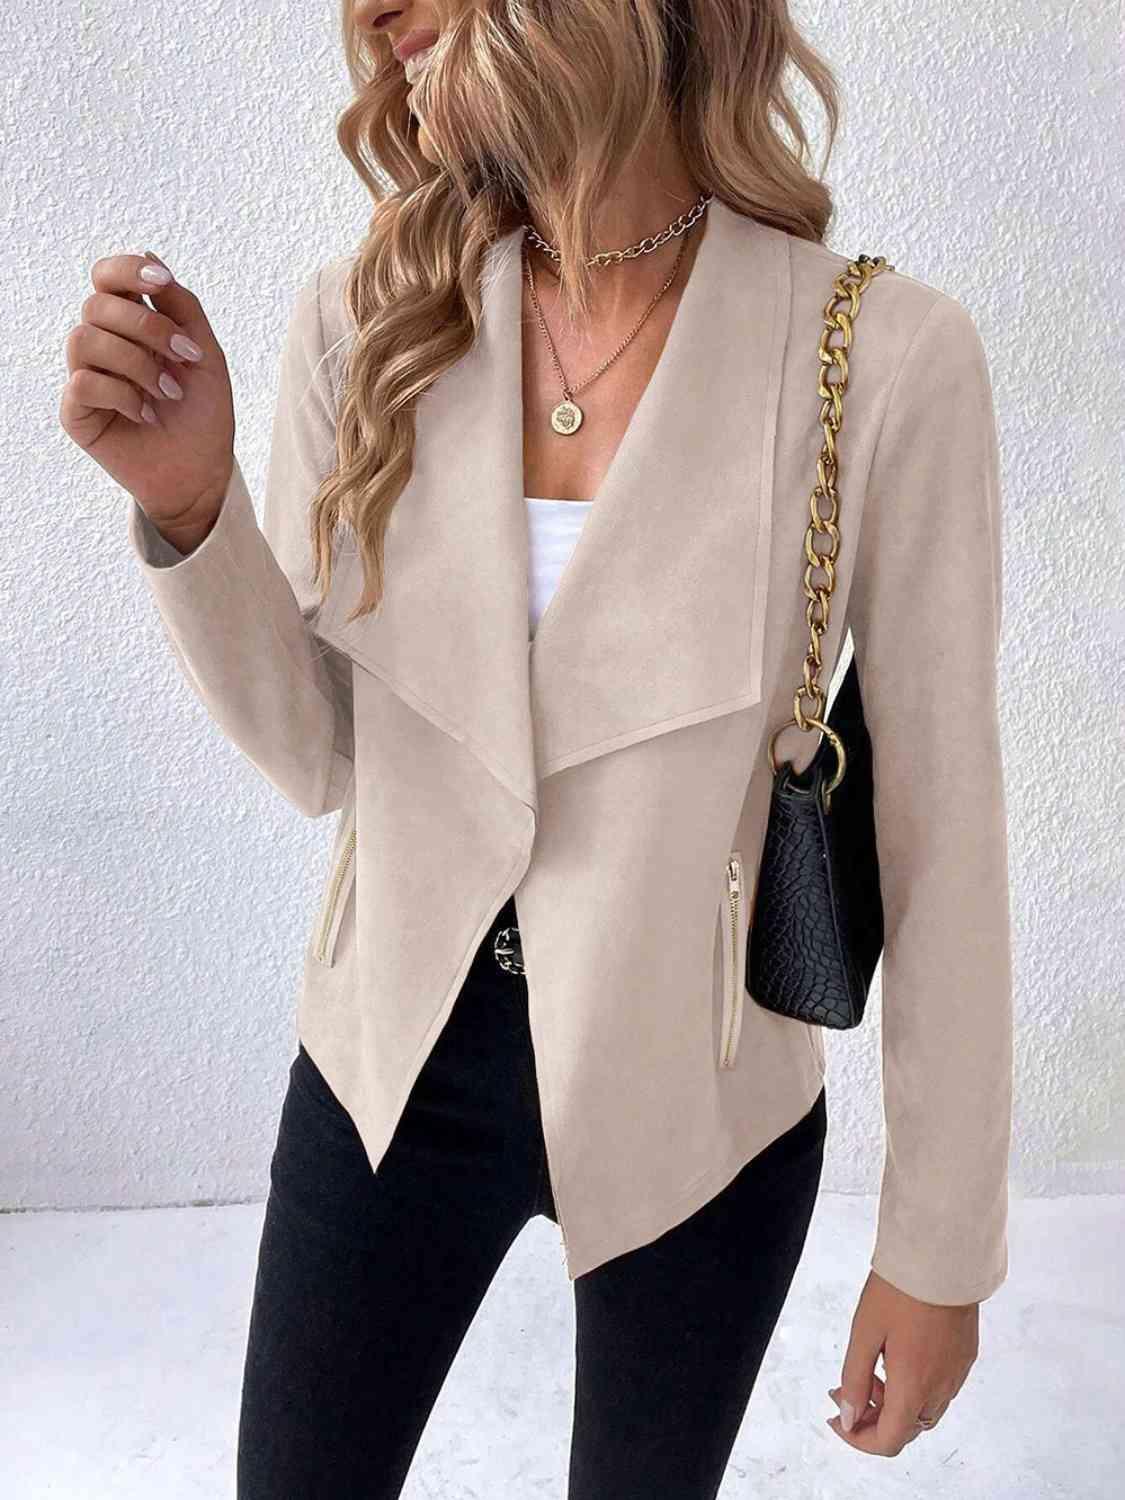 a woman wearing a beige jacket and black pants